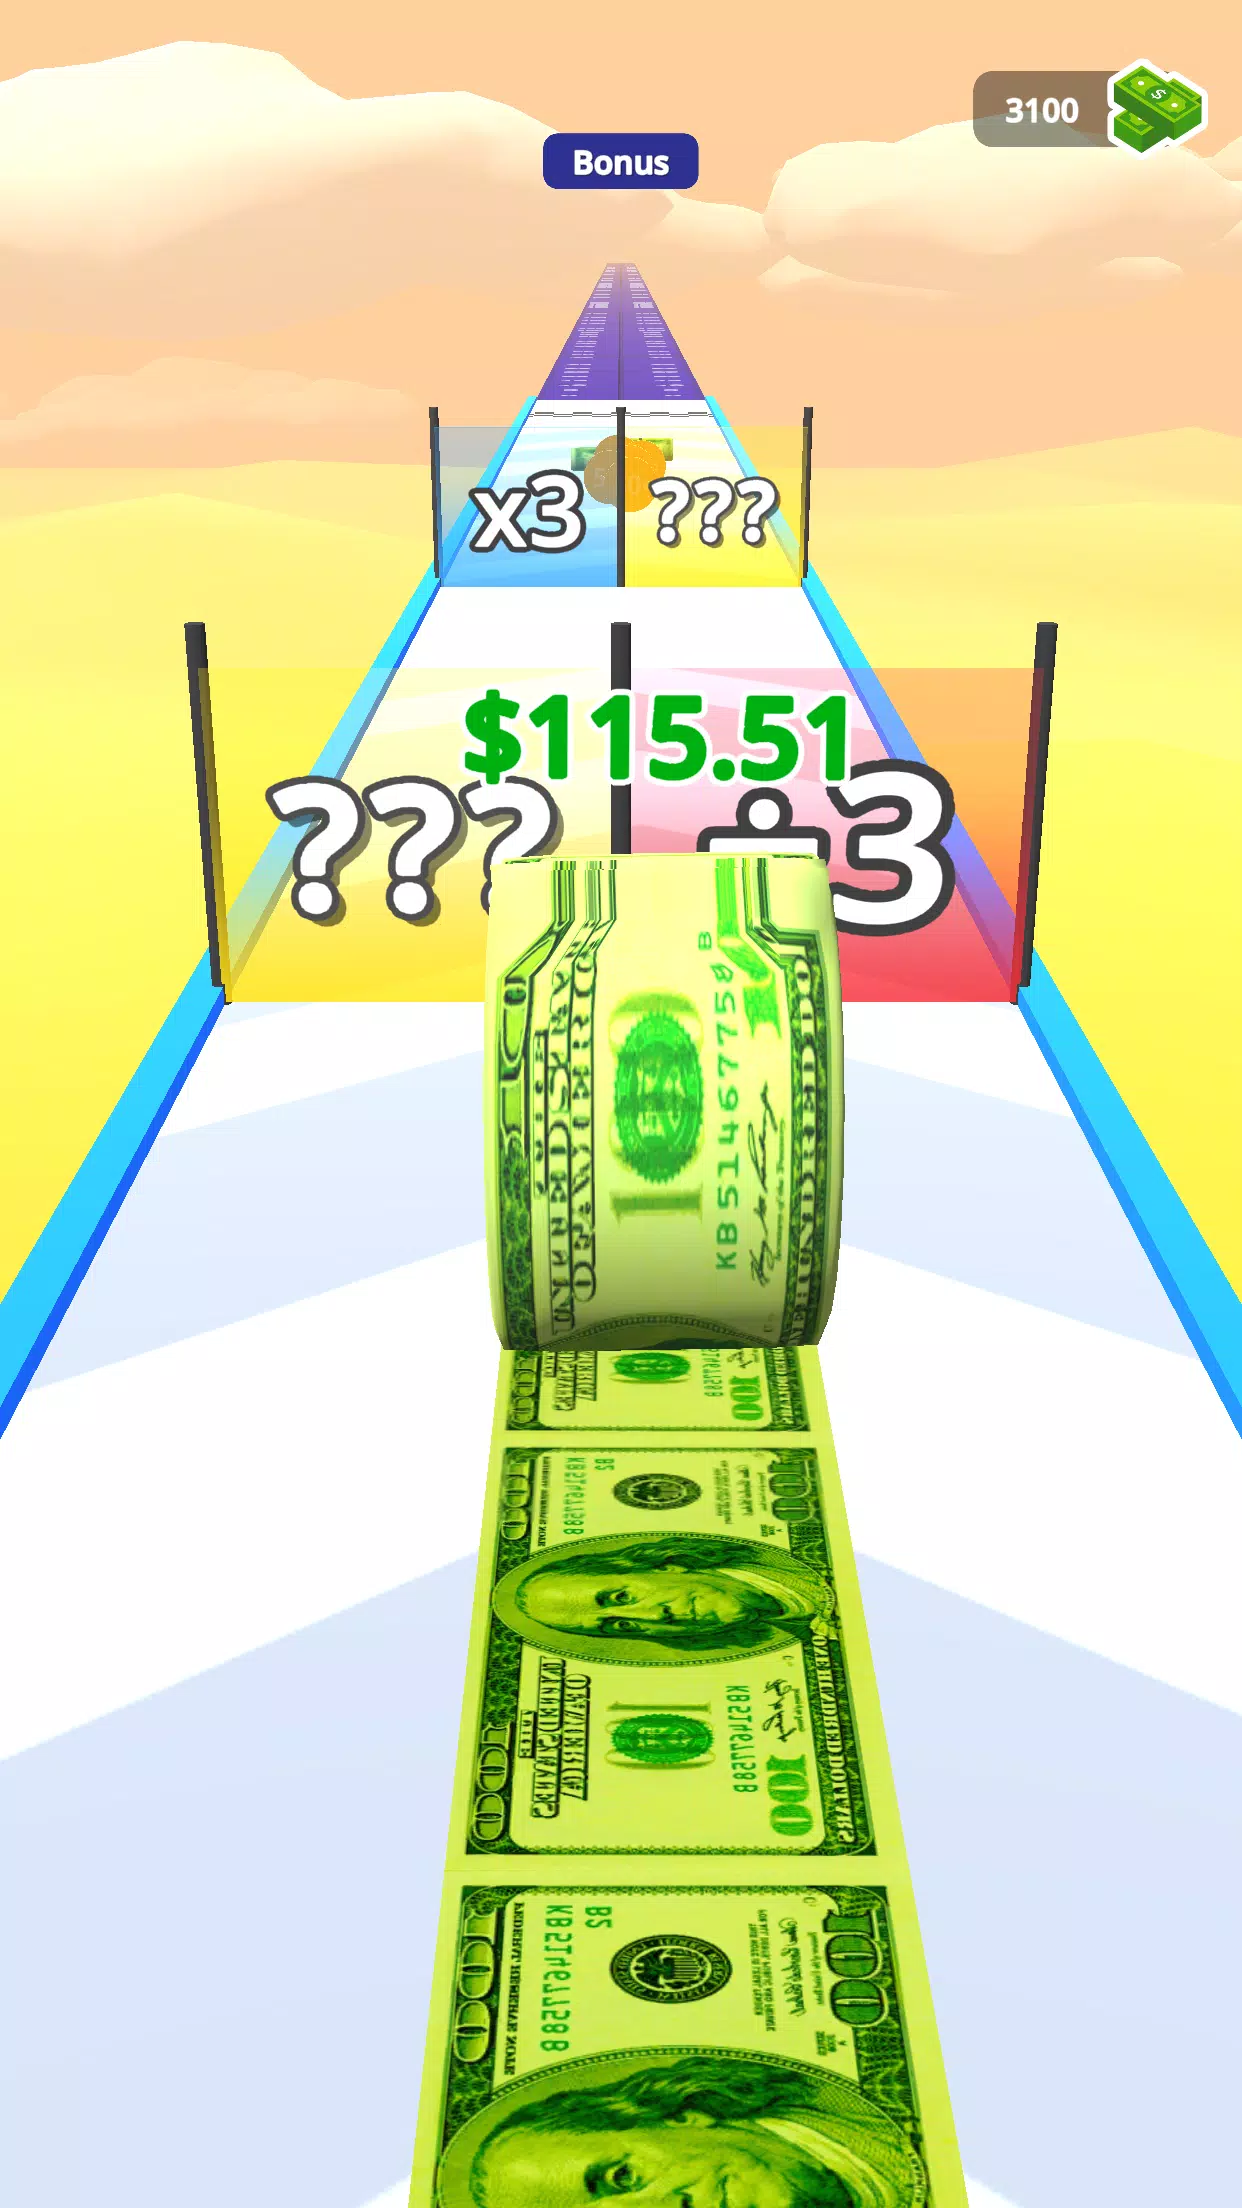 Money Rush - Earn Cash Rewards APK for Android Download